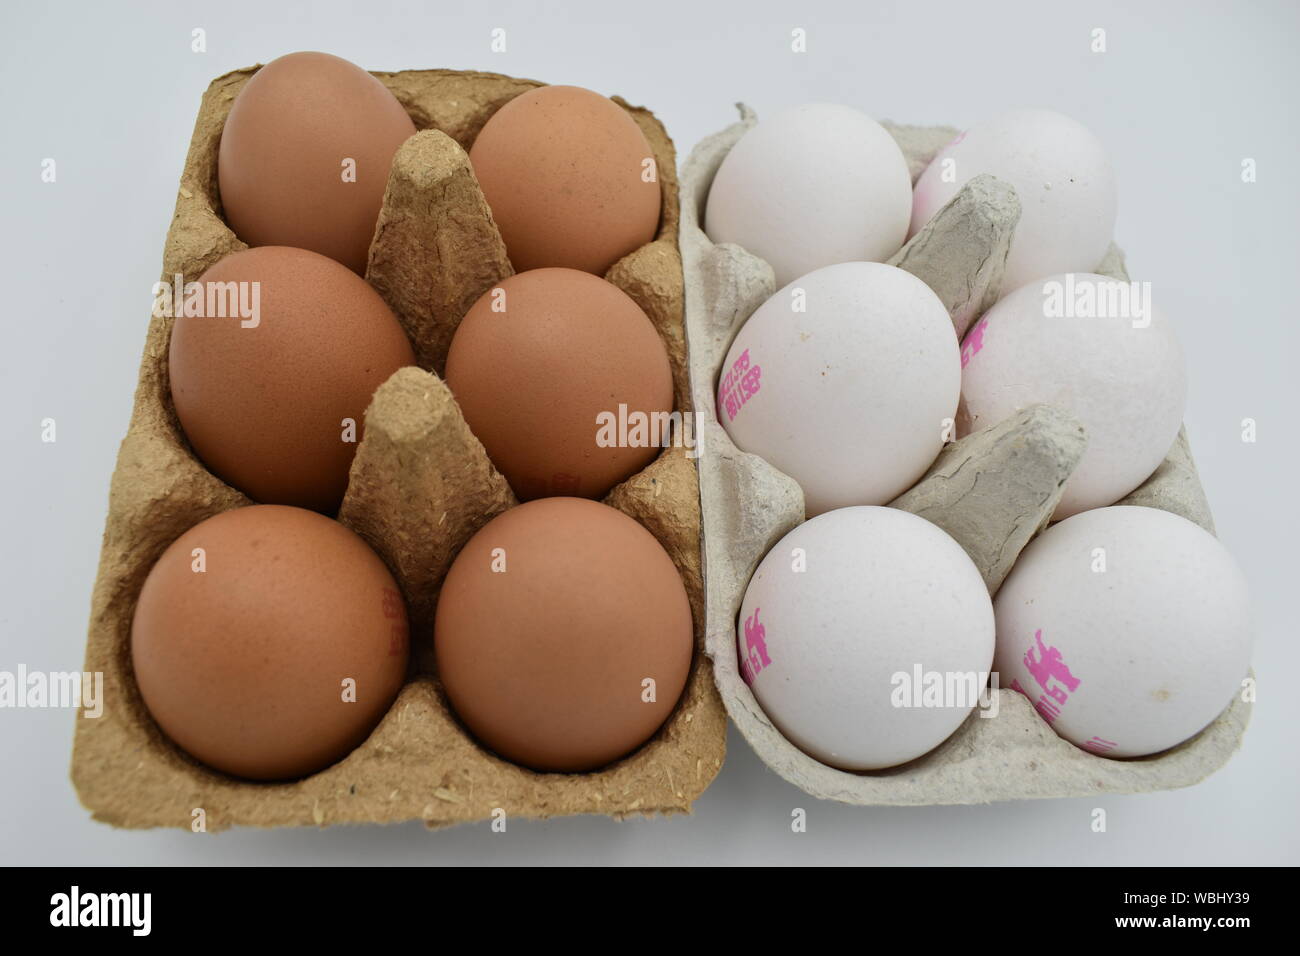 Six white and six brown eggs.  Nutritionally no different, we are told, yet people still prefer brown eggs. Stock Photo